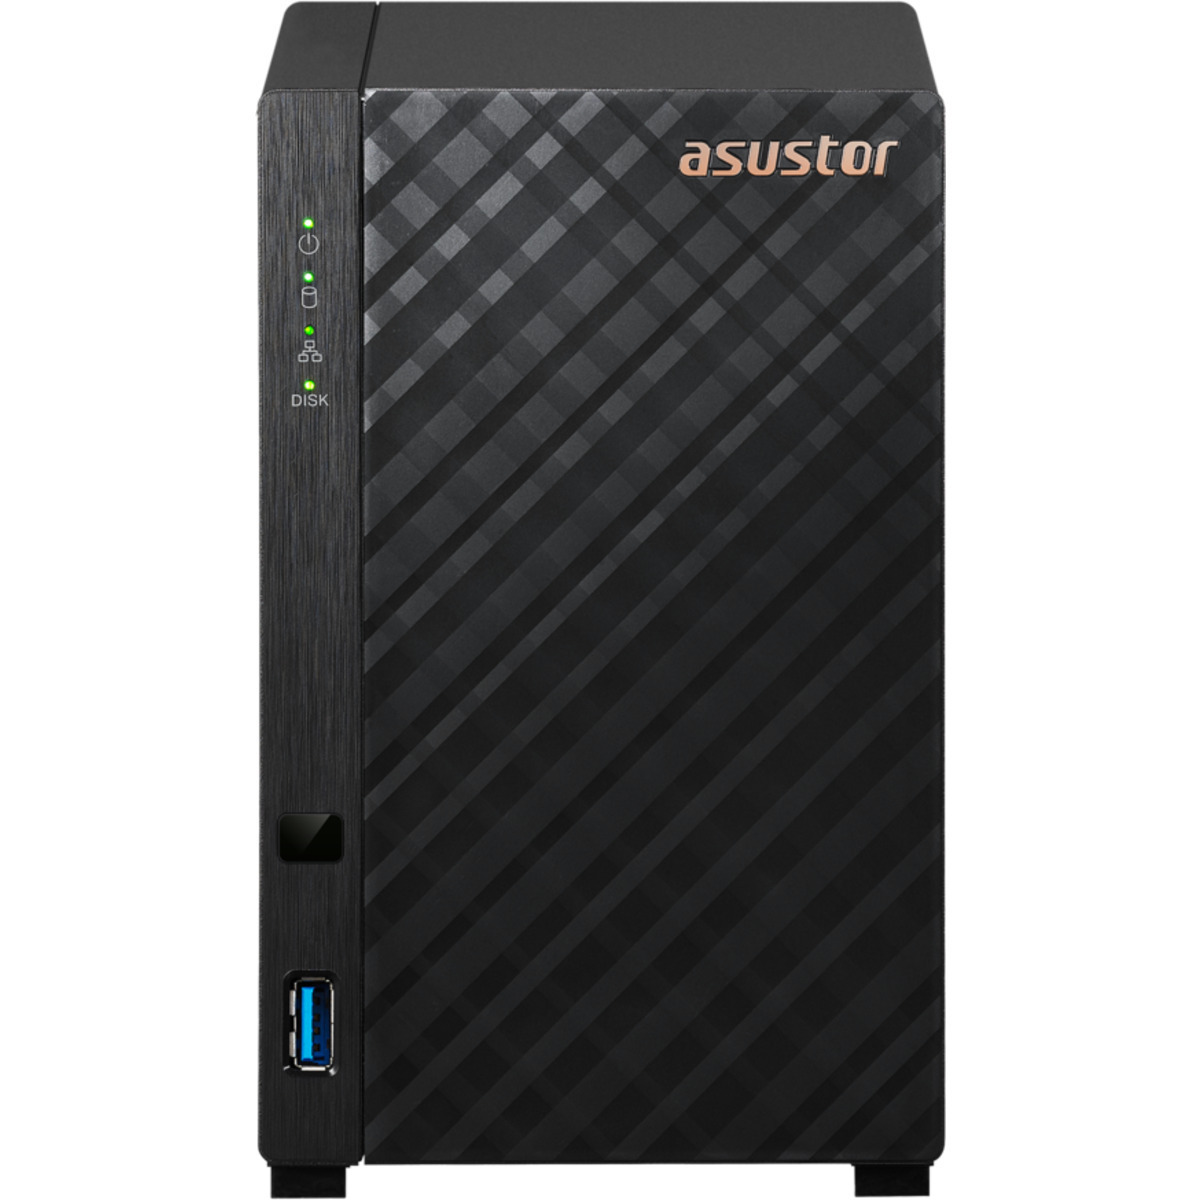 ASUSTOR DRIVESTOR 2 Lite AS1102TL 24tb 2-Bay Desktop Personal / Basic Home / Small Office NAS - Network Attached Storage Device 2x12tb Western Digital Ultrastar DC HC520 HUH721212ALE600 3.5 7200rpm SATA 6Gb/s HDD ENTERPRISE Class Drives Installed - Burn-In Tested DRIVESTOR 2 Lite AS1102TL